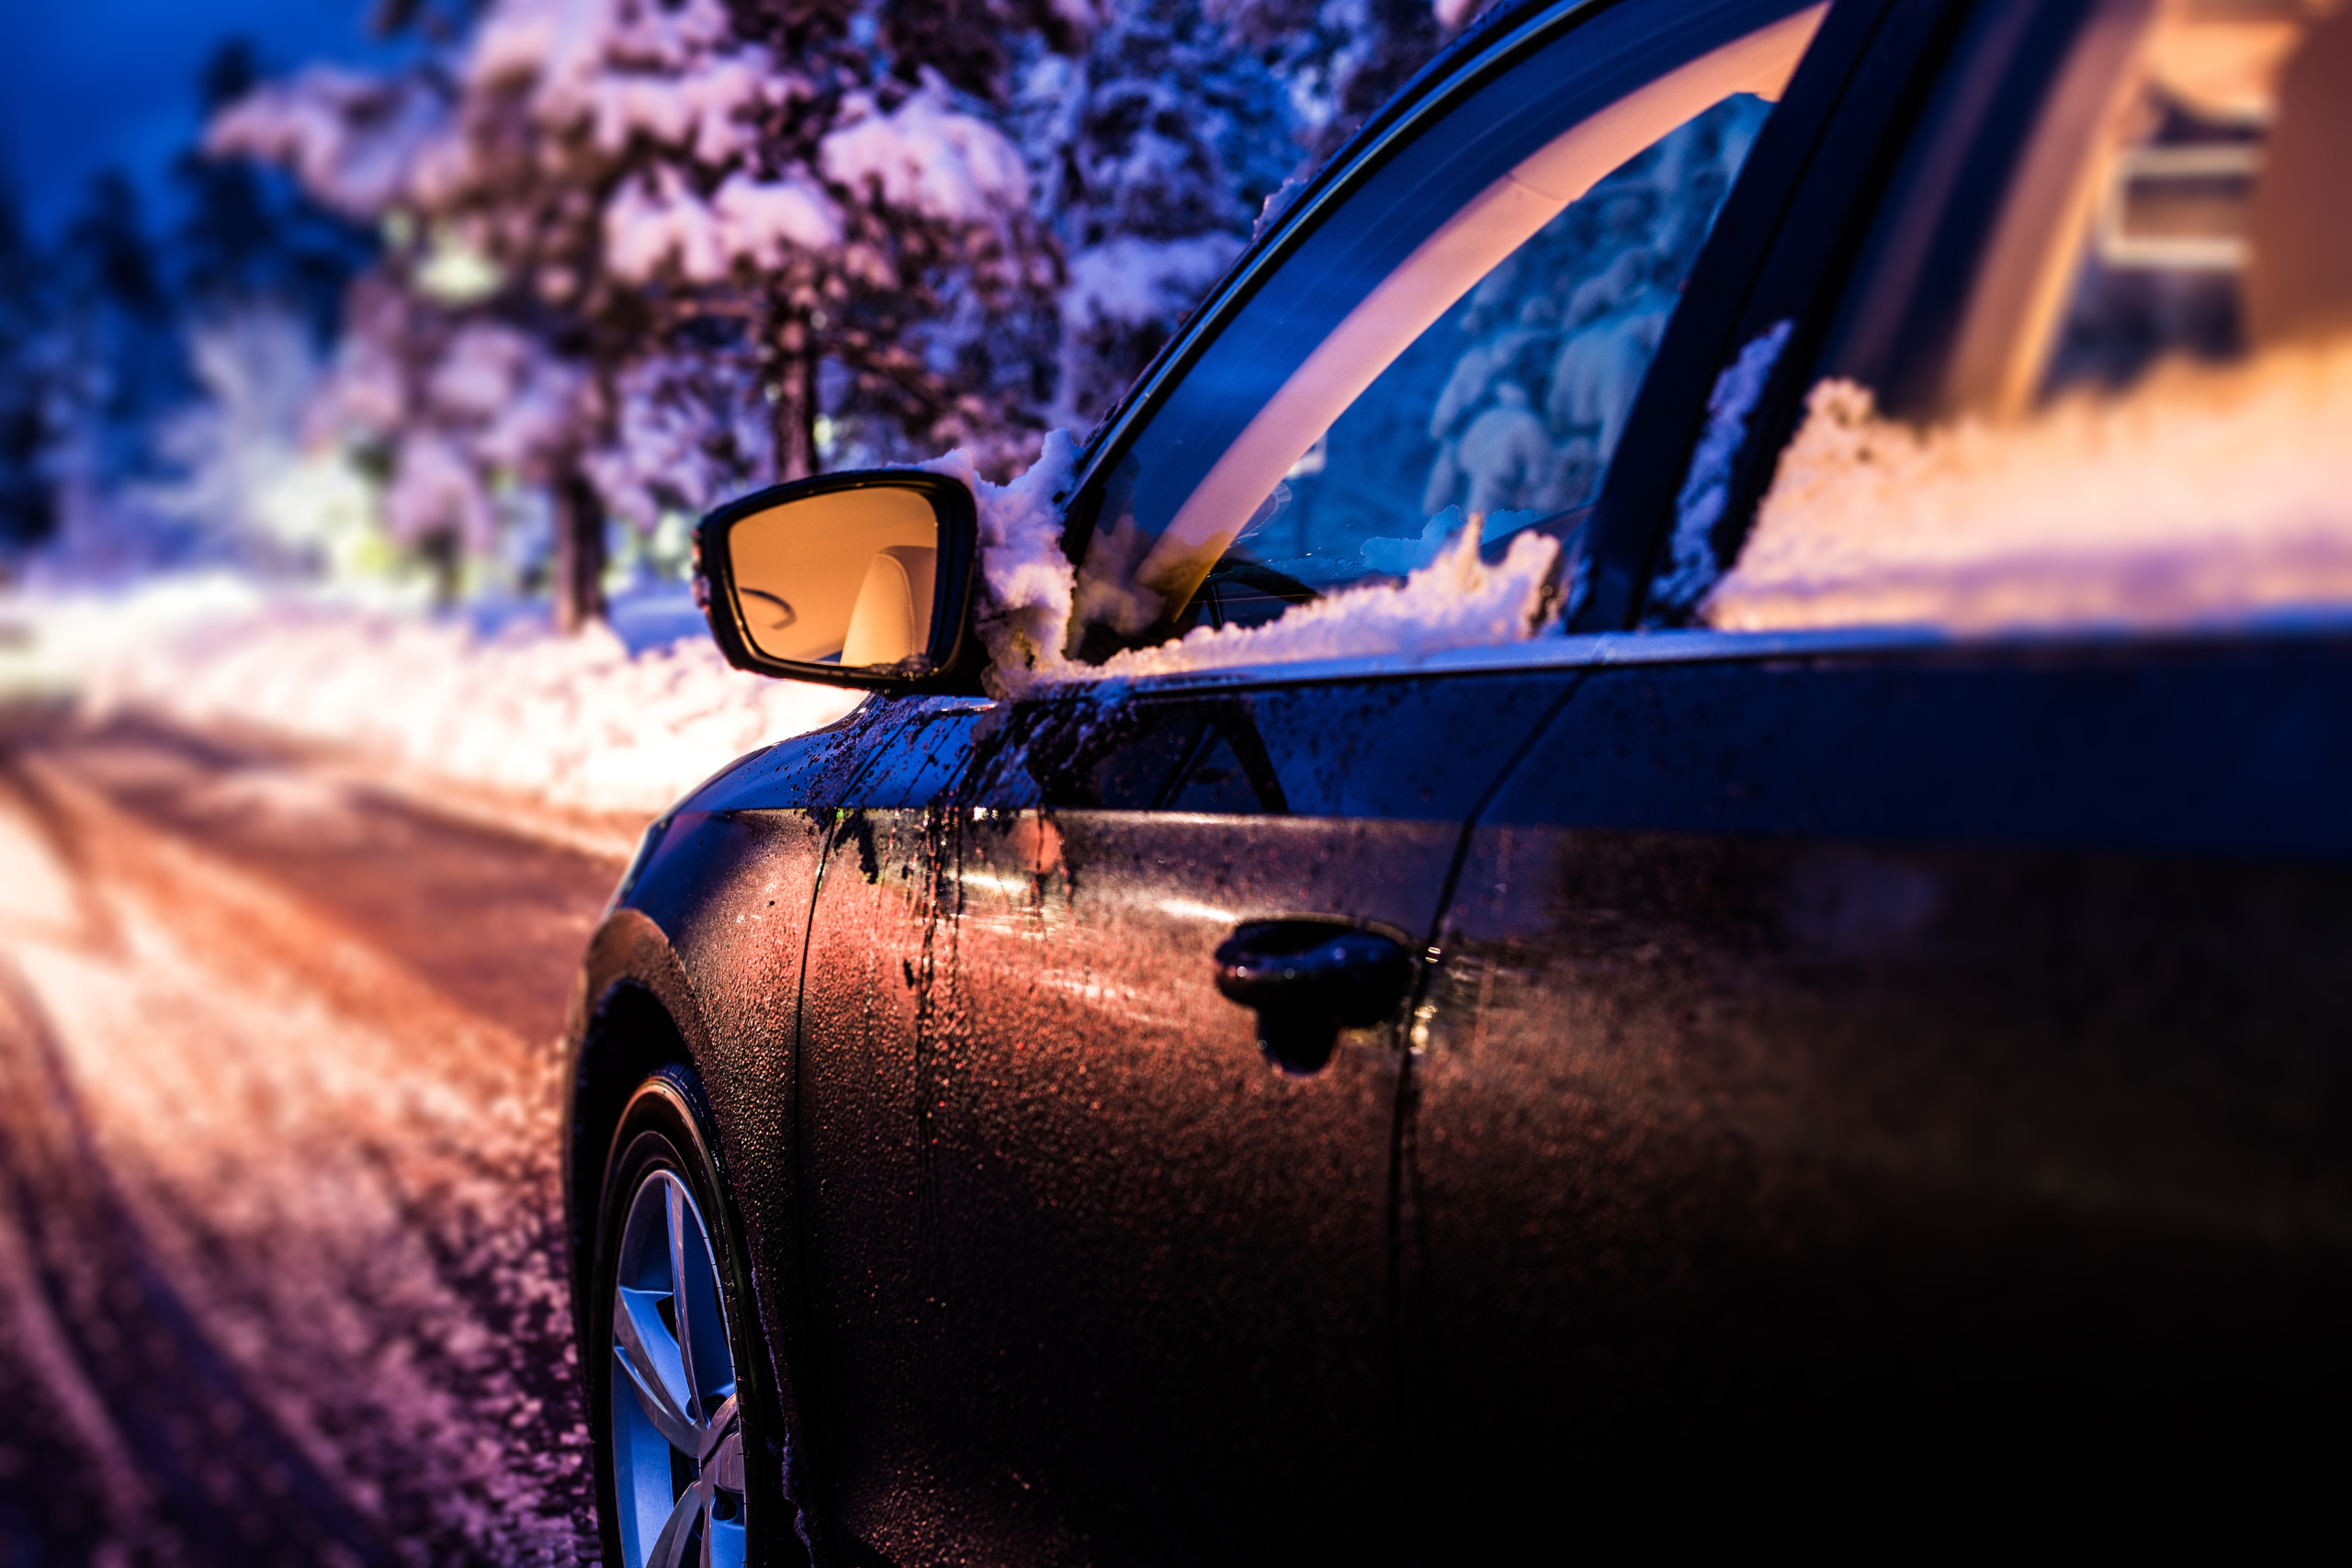 Black car parked on a snowy road at dusk, with the warm glow of street lights reflecting off its shiny surface, highlighting the importance of vehicle safety during winter conditions.